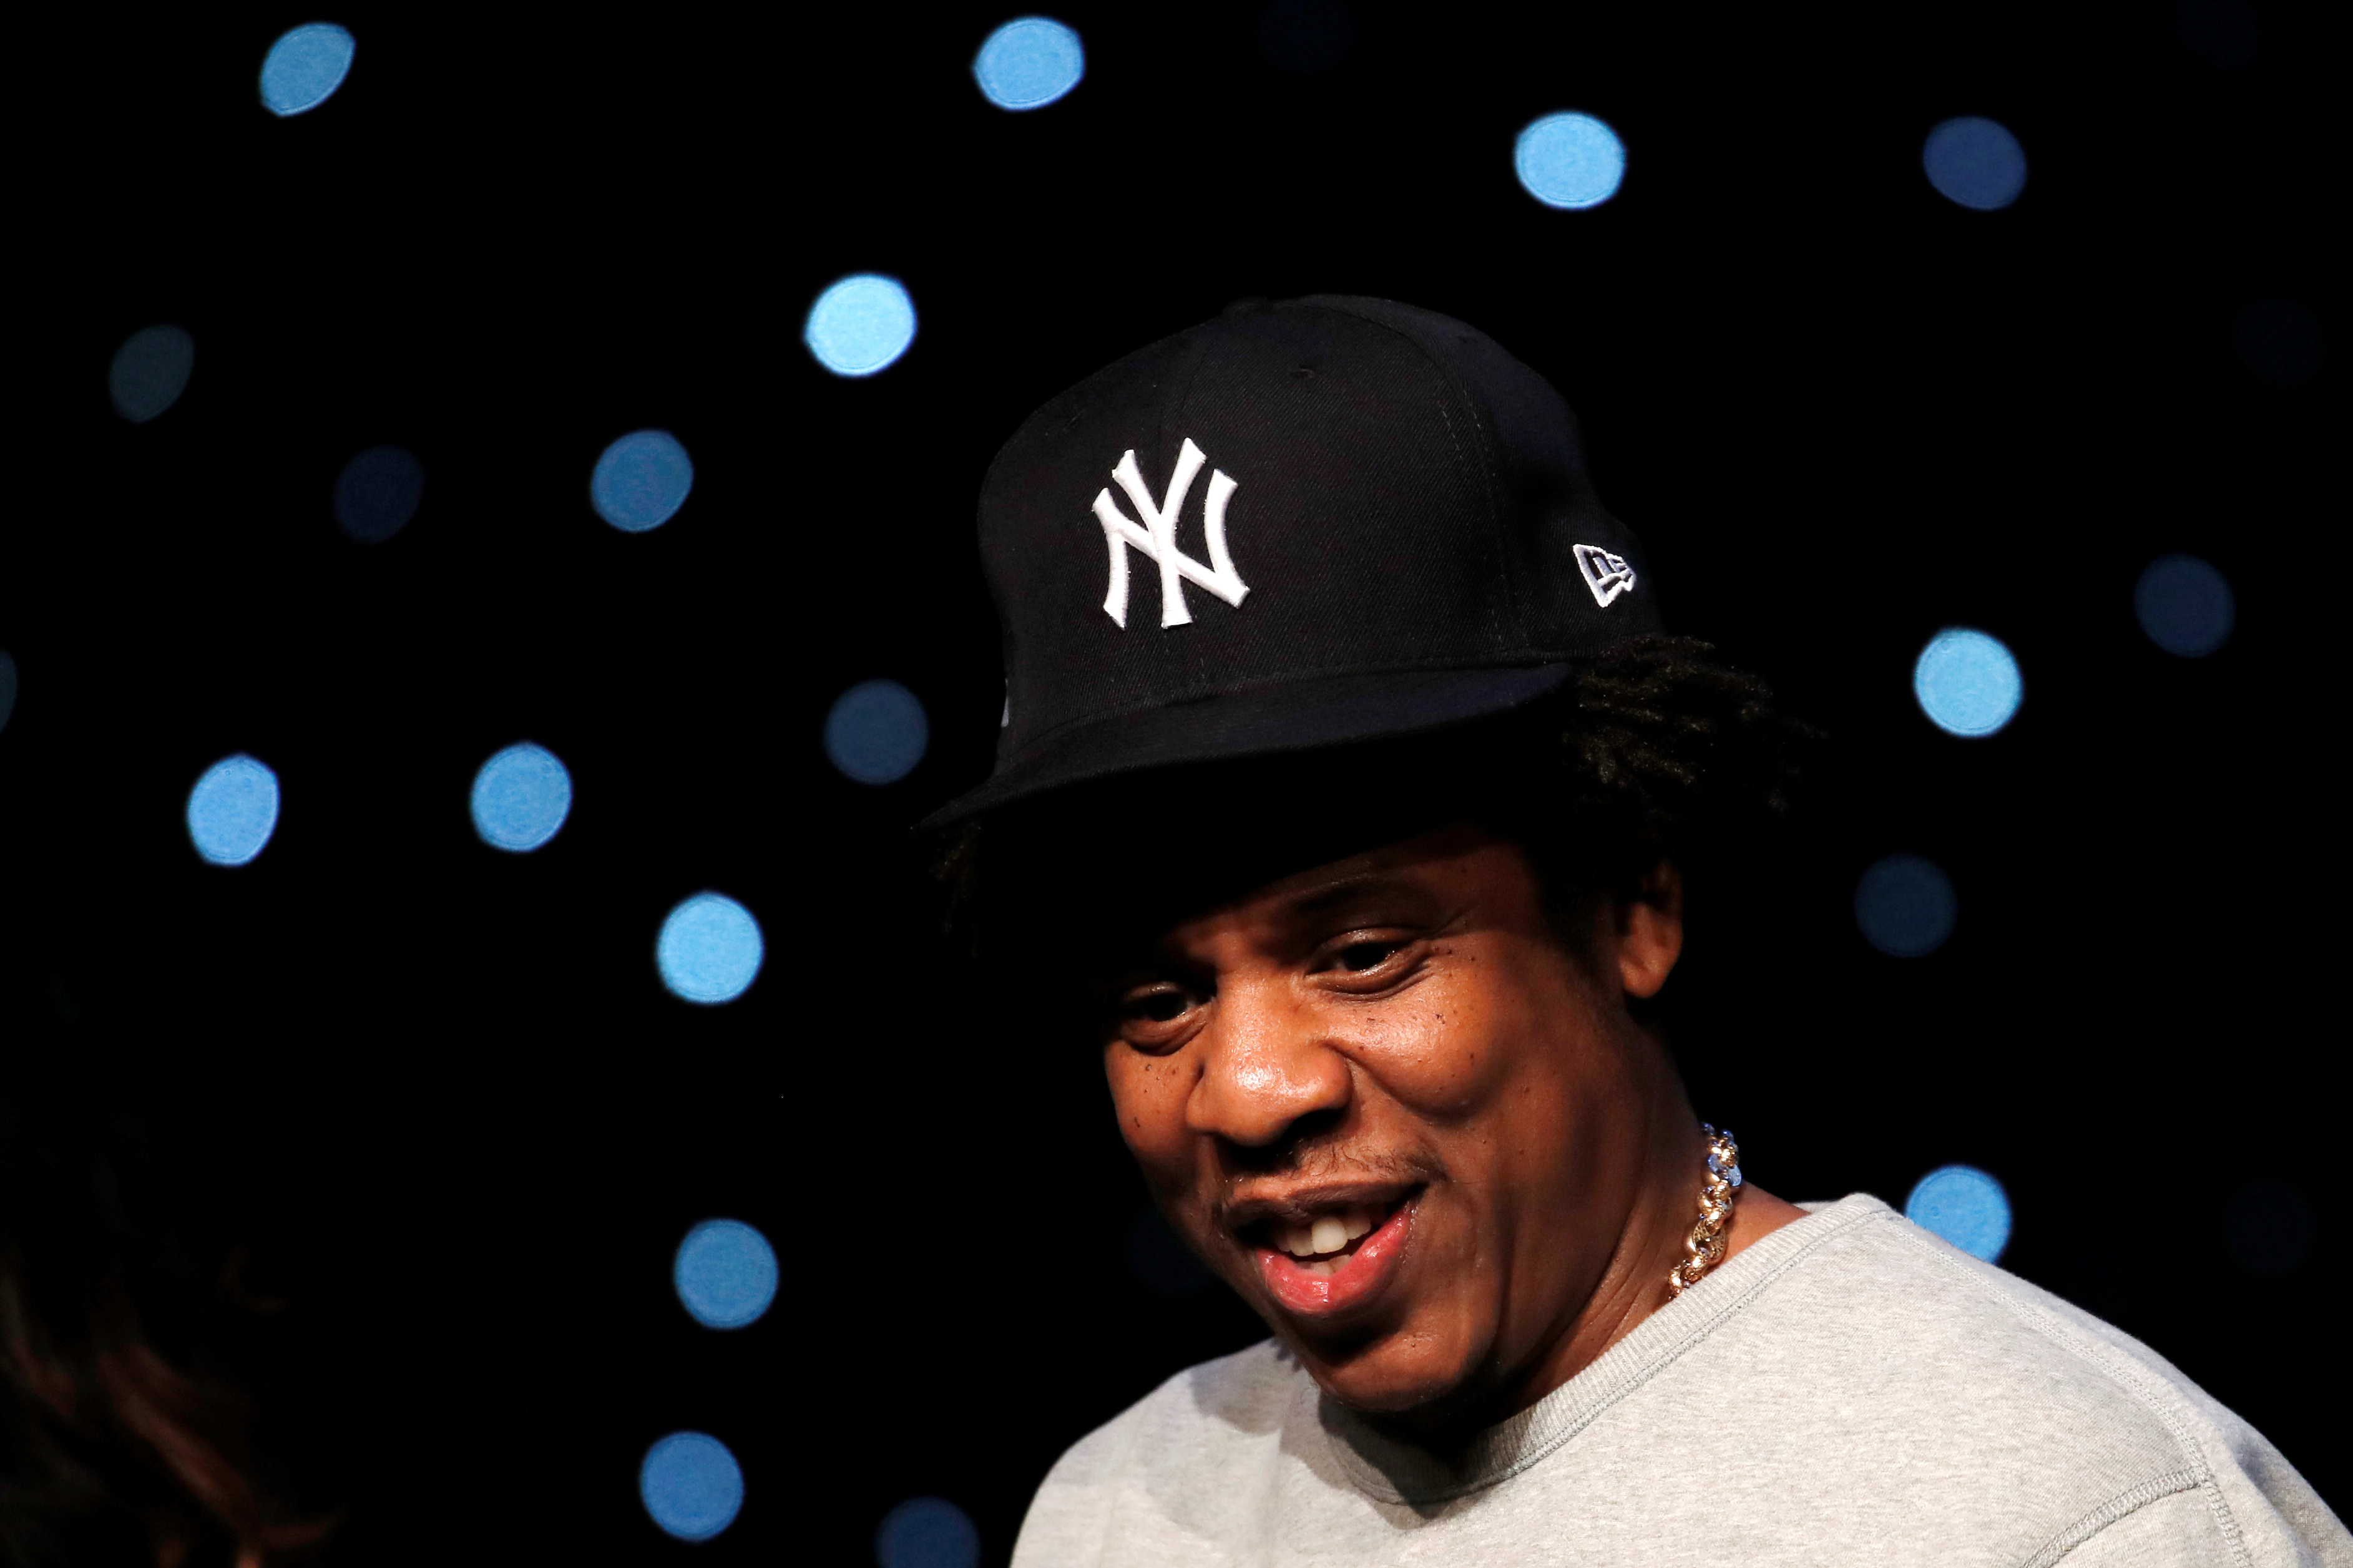 FILE PHOTO - Shawn "Jay-Z" Carter, a founding partner of Reform Alliance appears during launch event in New York